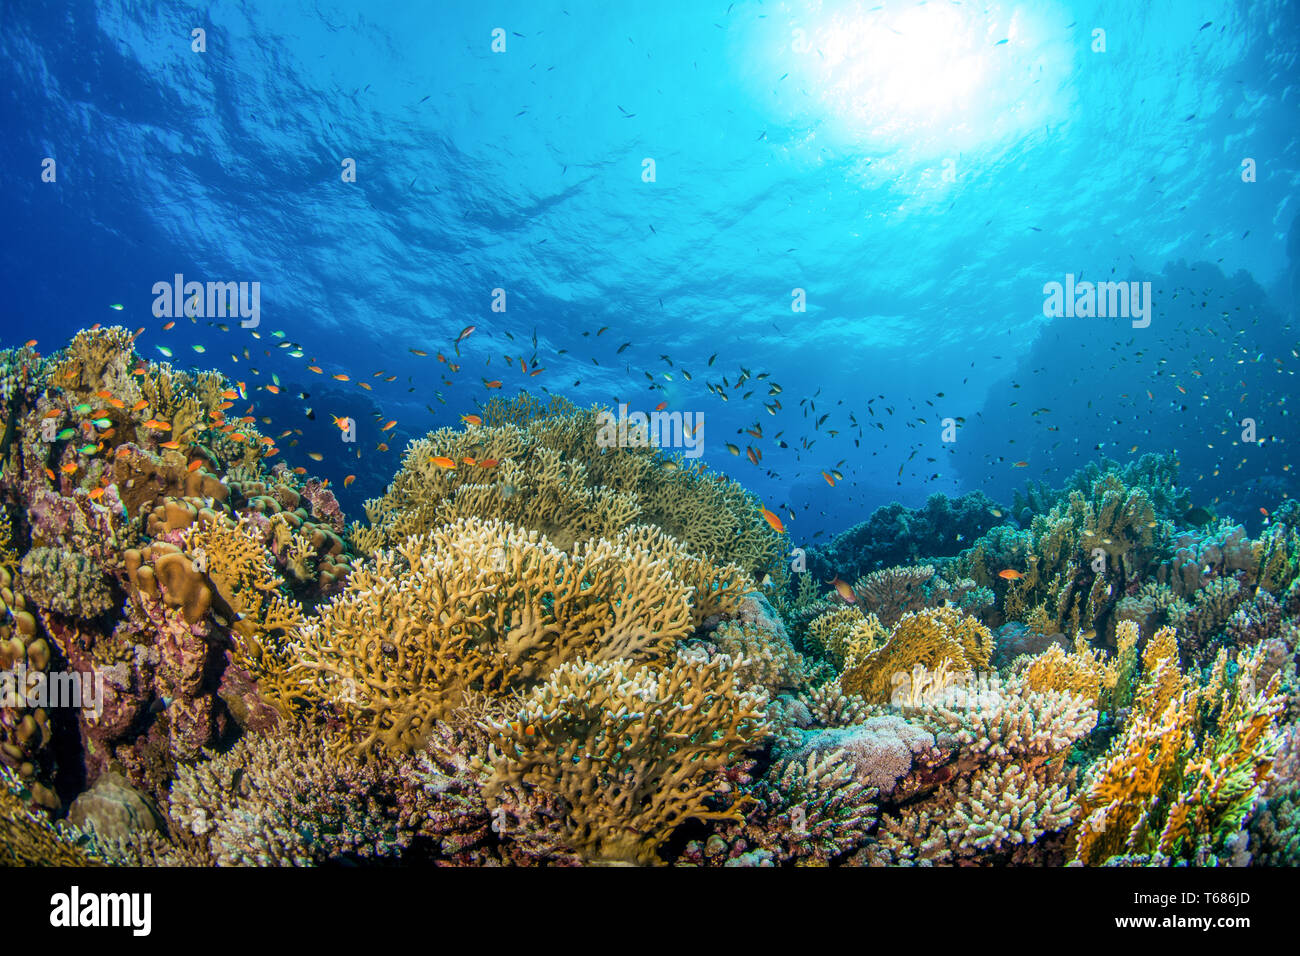 Vibrant coral reef in tropical water, with multi coloured hard and soft corals surrounded by orange and silver fish, with the sun and ocean surface Stock Photo